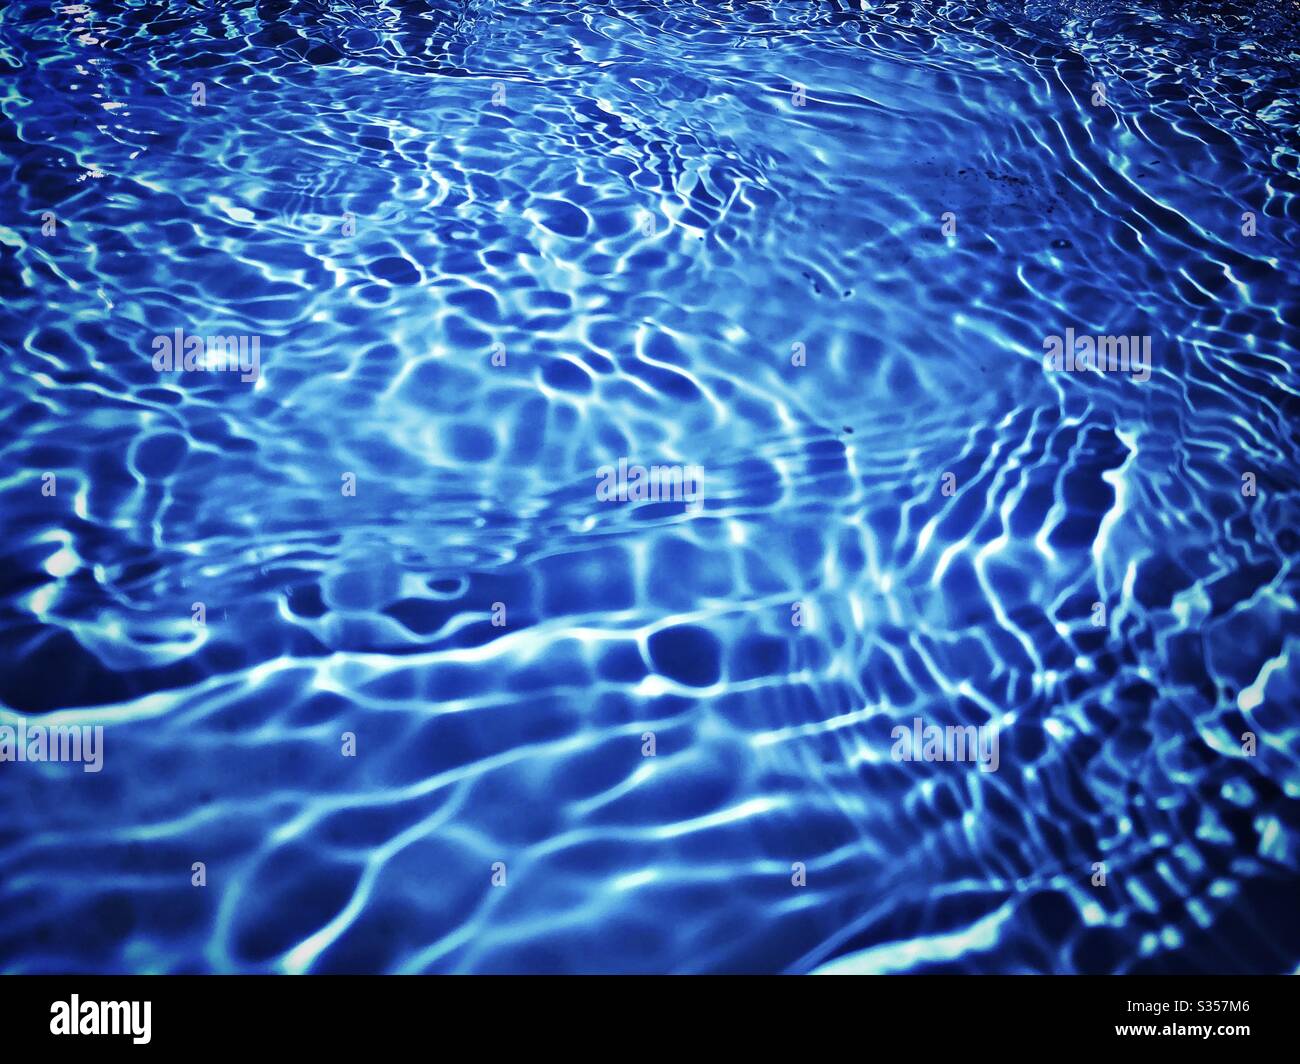 A close up view on the surface of water in a blue swimming pool. Light reflects off gentle ripples creating a colourful summer background pattern. Fresh, clean and vibrant summery vibes. Stock Photo